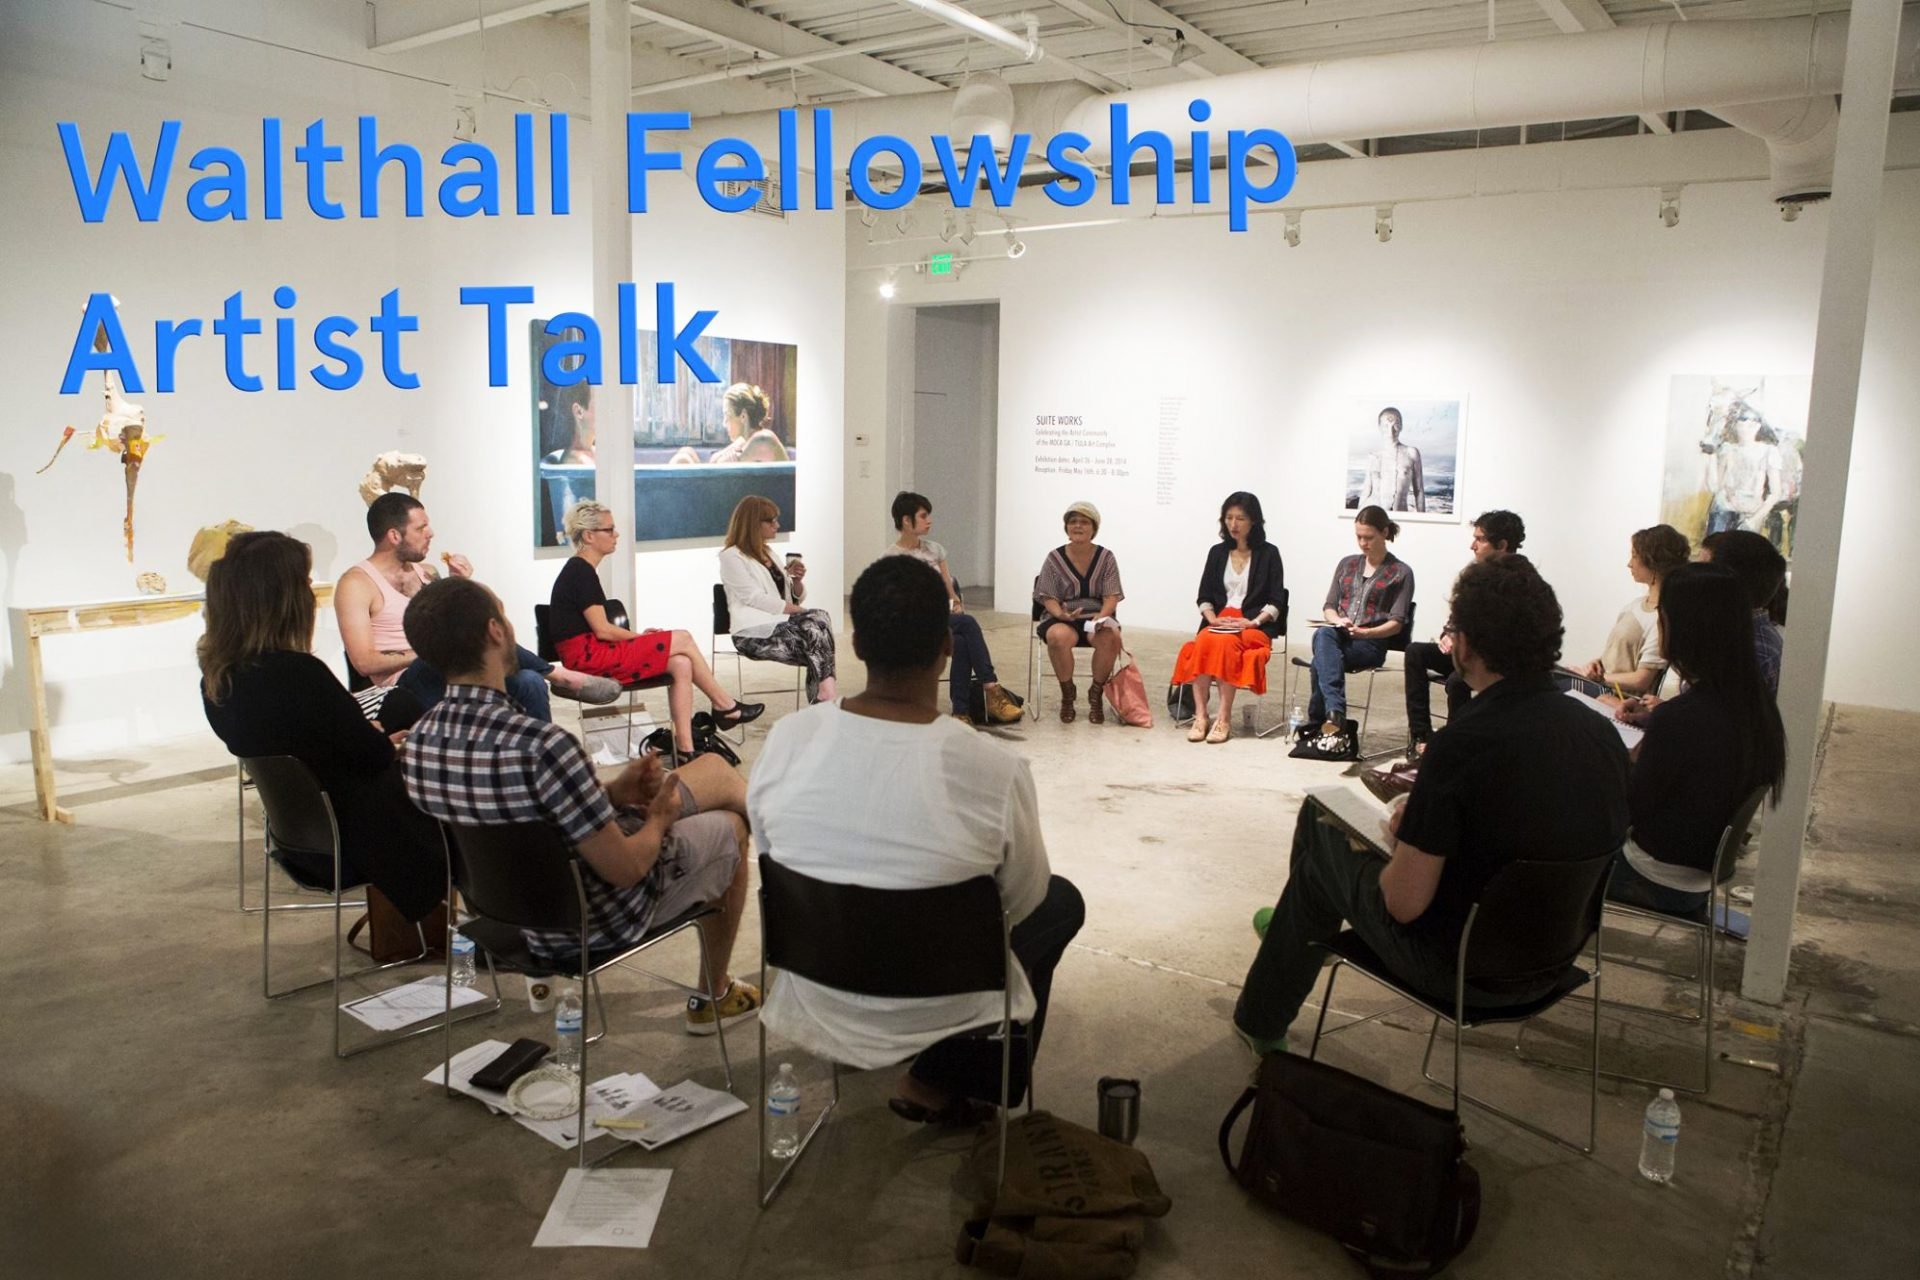 An artist talk event in a gallery space with the title “Walthall Fellowship Artist Talk” on the wall. Several people are sitting in a circle on folding chairs and talking. The gallery has white walls and concrete floors, with sculptures and artwork on display.